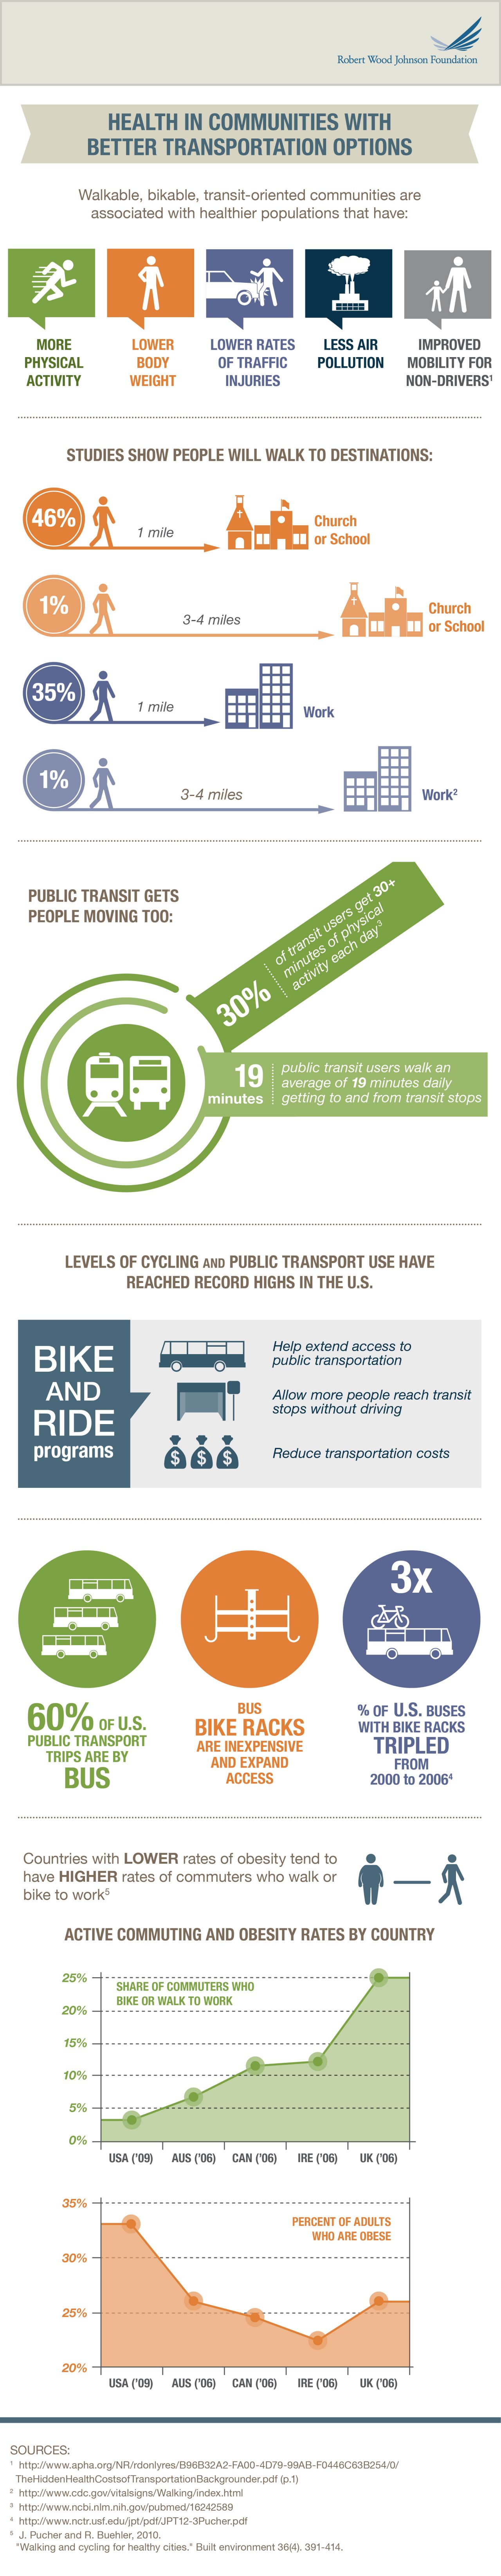 Infographic for https://prodwebauth1.rwjf.org:5433/siteadmin#/content/rwjf/en/library/infographics/infographic--better-transportation-options---healthier-lives 